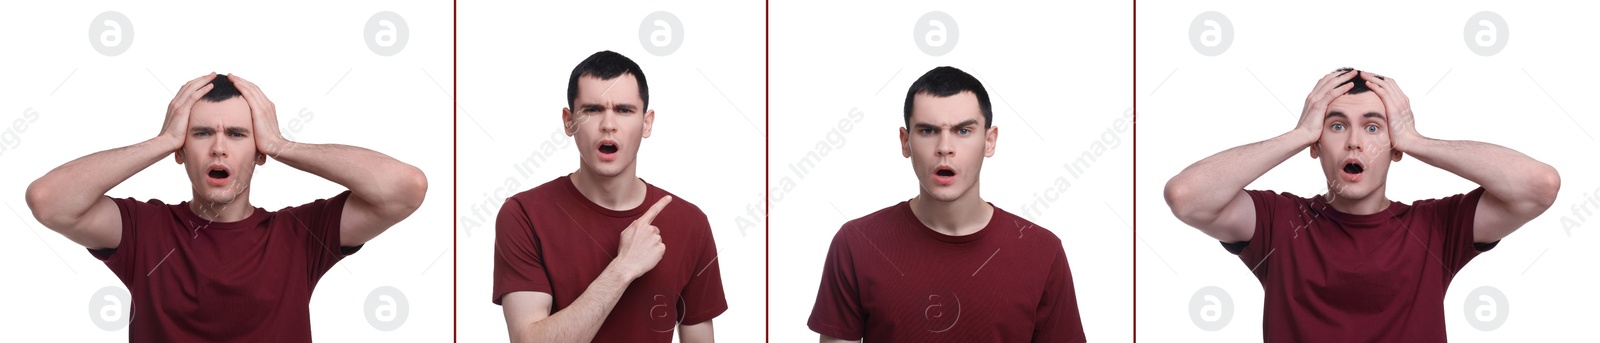 Image of Surprised man on white background, collage of photos